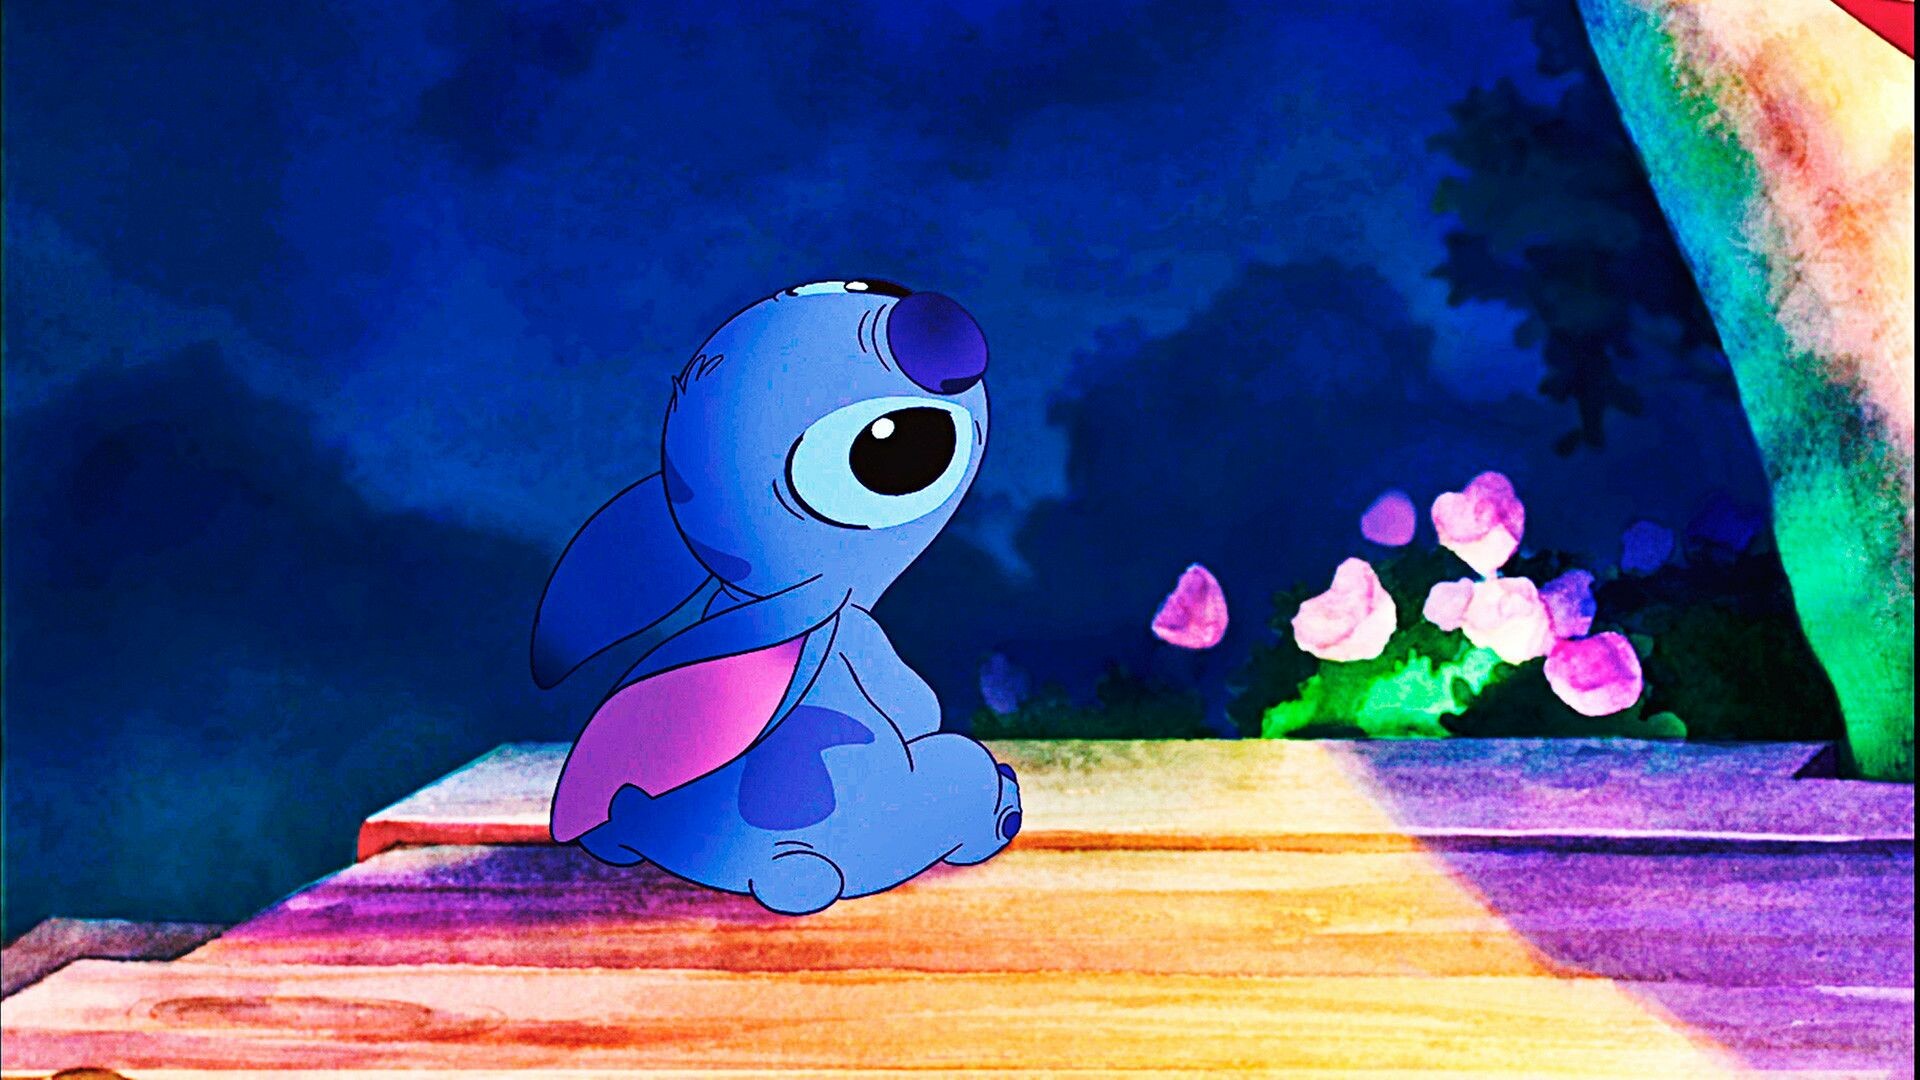 Lilo and Stitch: An illegally-made, genetically engineered, extraterrestrial life-form resembling a blue koala. 1920x1080 Full HD Background.